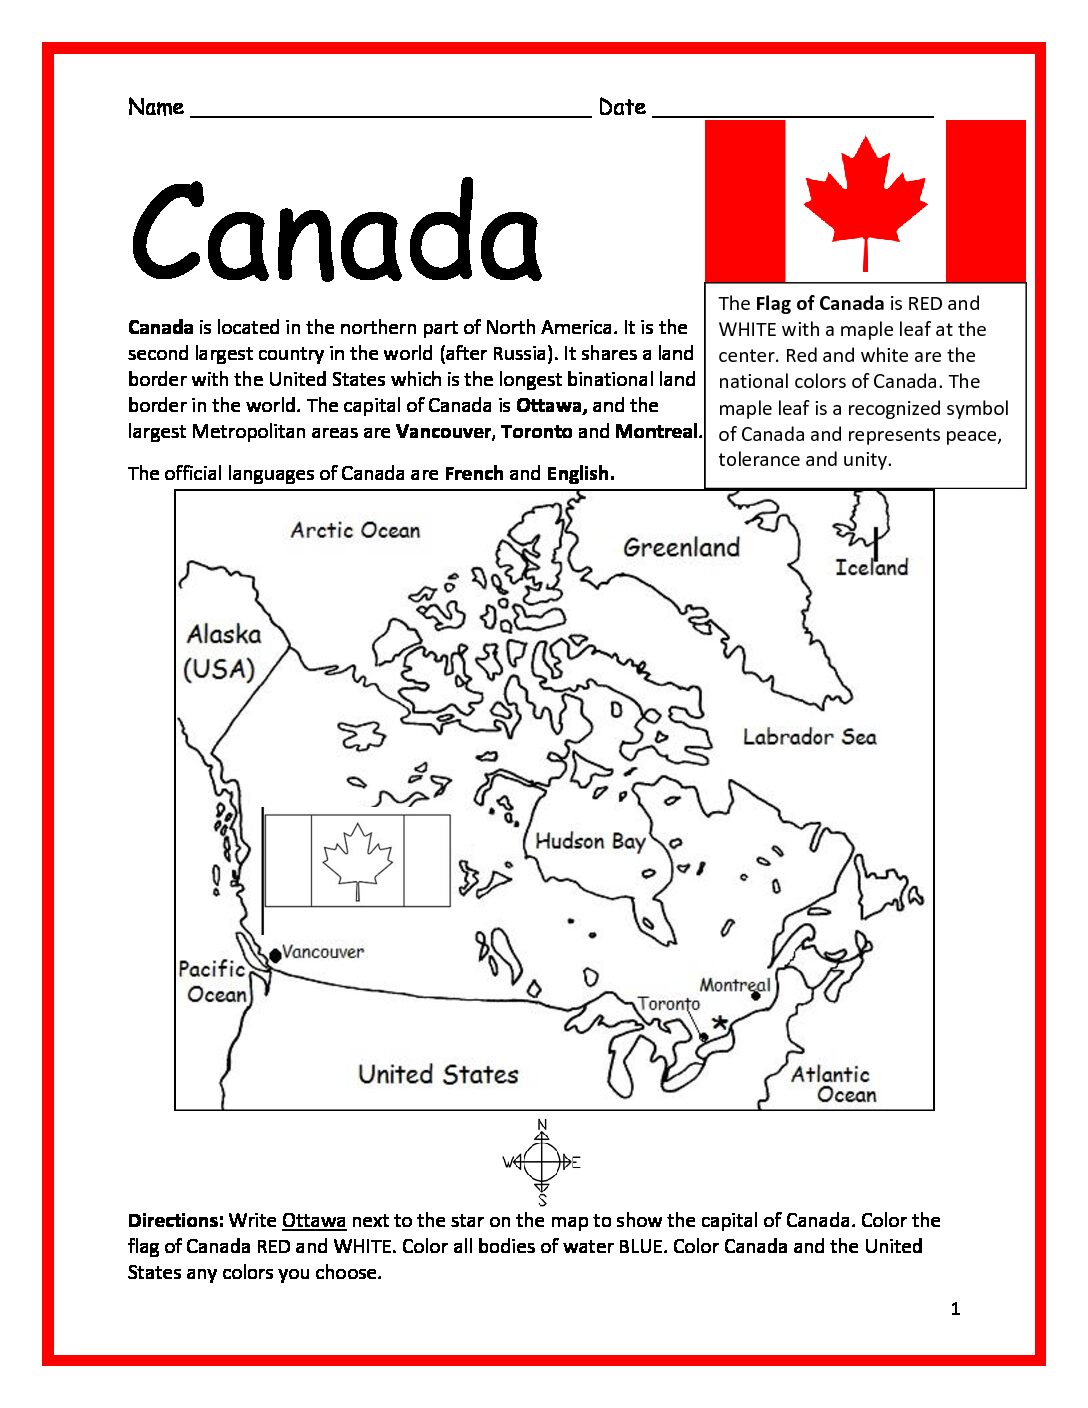 Canada - Introductory Geography Worksheet